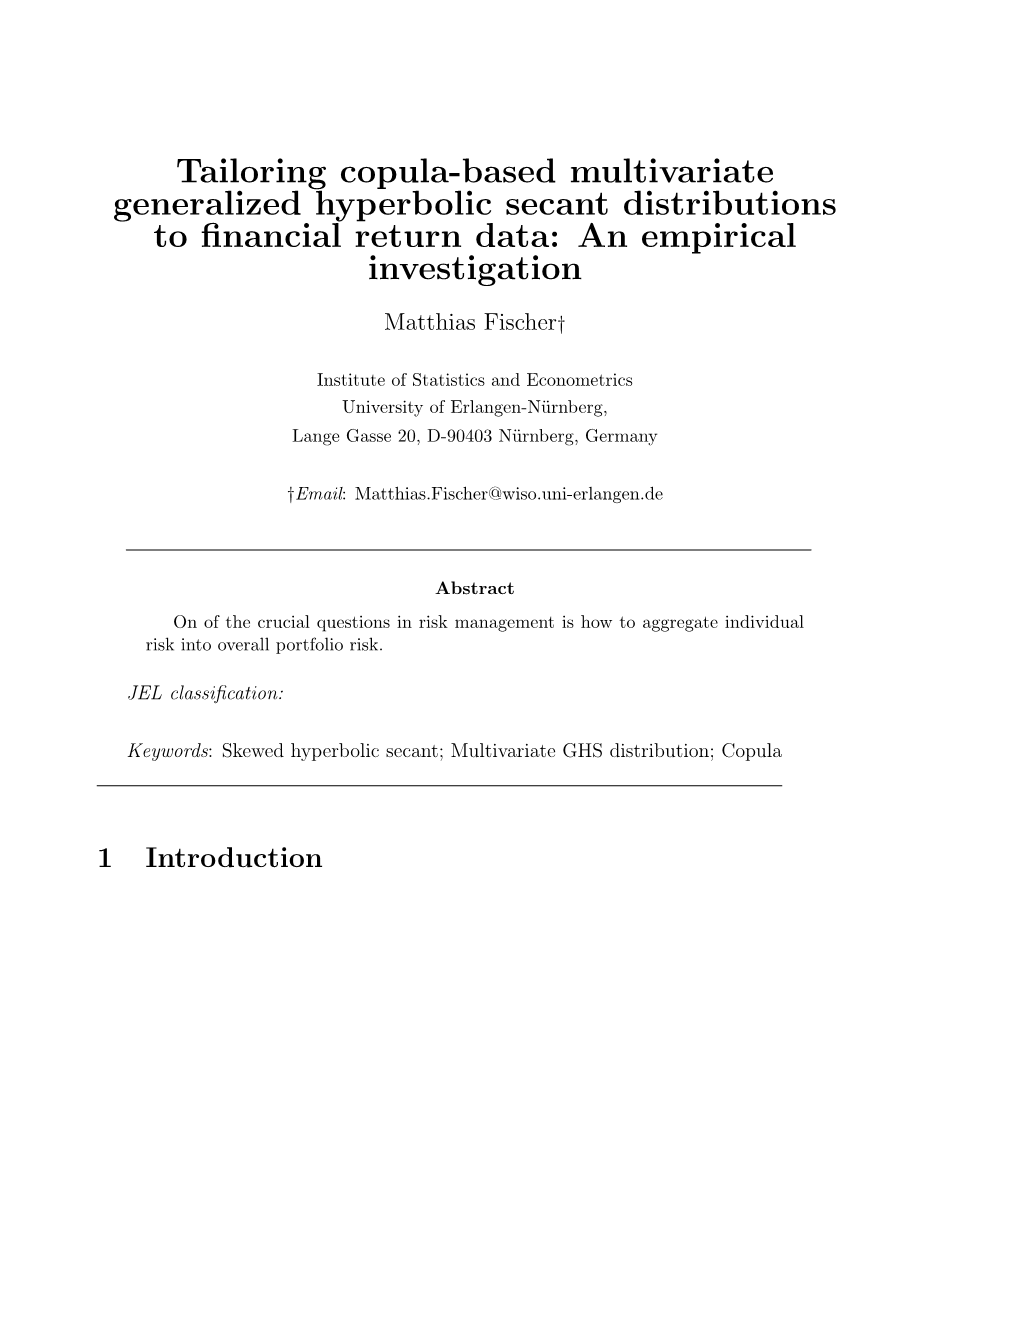 Tailoring Copula-Based Multivariate Generalized Hyperbolic Secant Distributions to ﬁnancial Return Data: an Empirical Investigation